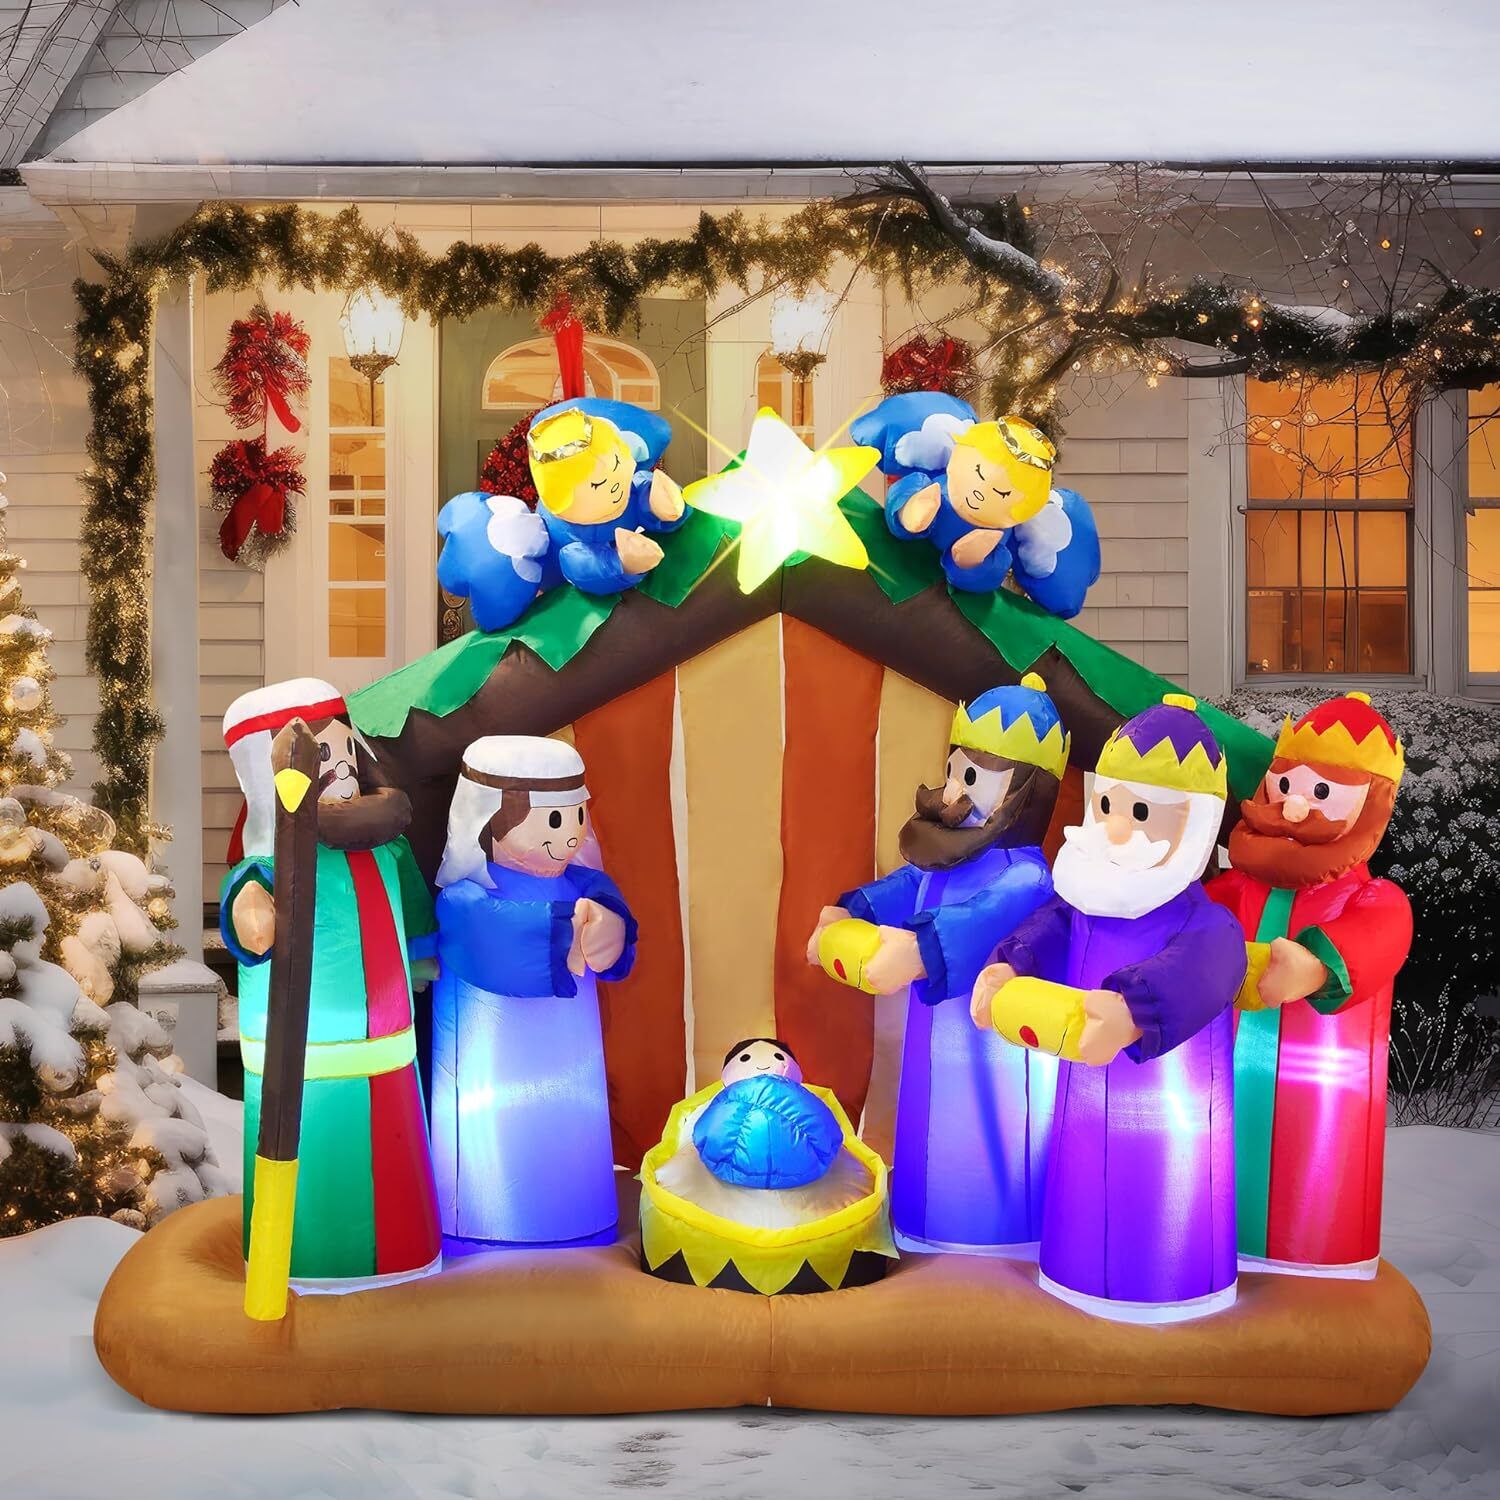 Syncfun 6 ft Christmas Inflatable Nativity Scene with Angels with Build-in LEDs